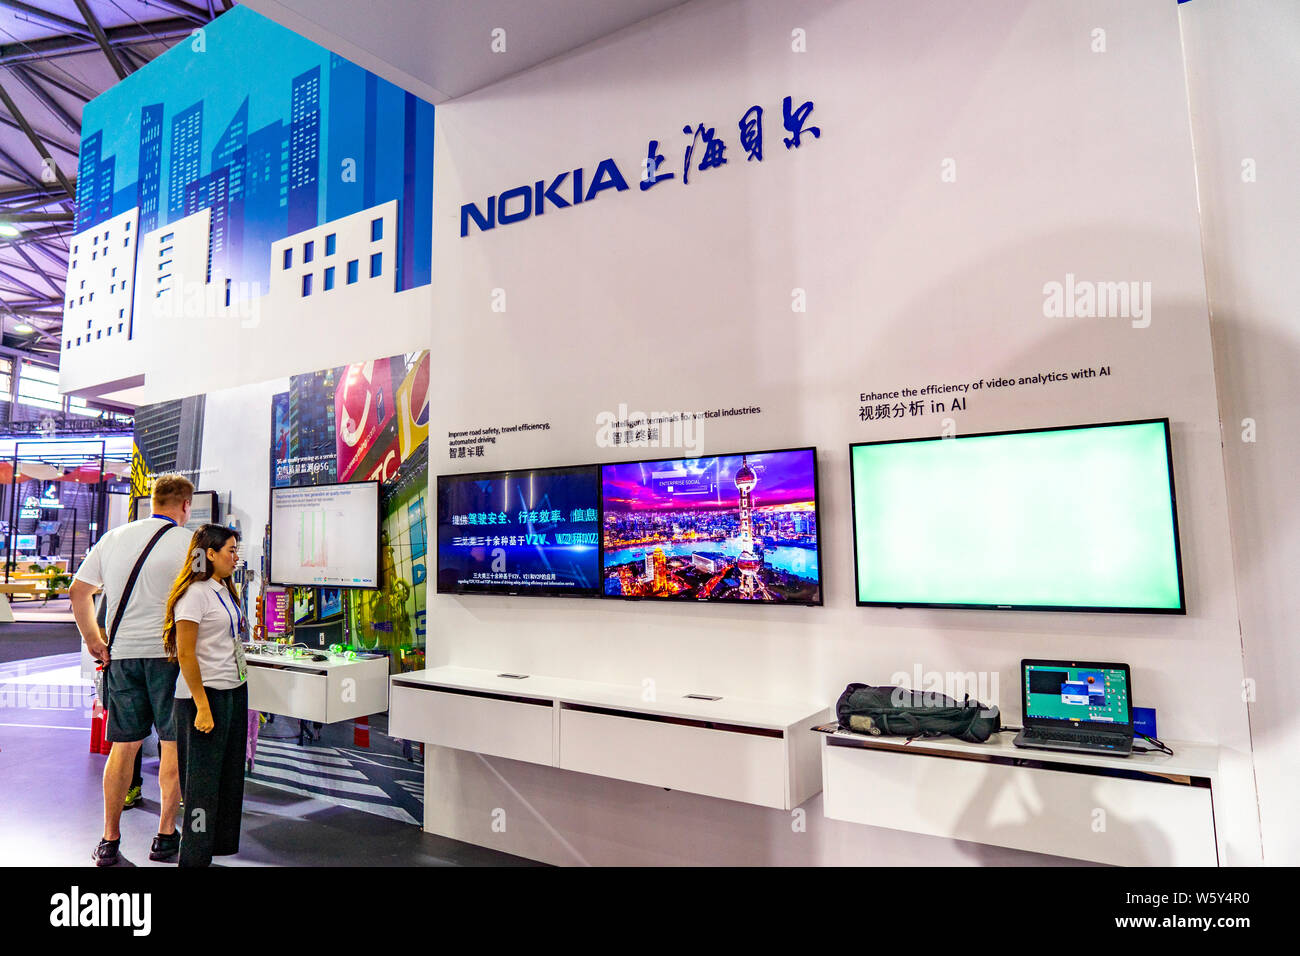 --FILE--People visit the stand of Nokia during the 2018 Mobile World Congress (MWC) in Shanghai, China, 29 June 2018.   Finnish mobile telecom network Stock Photo